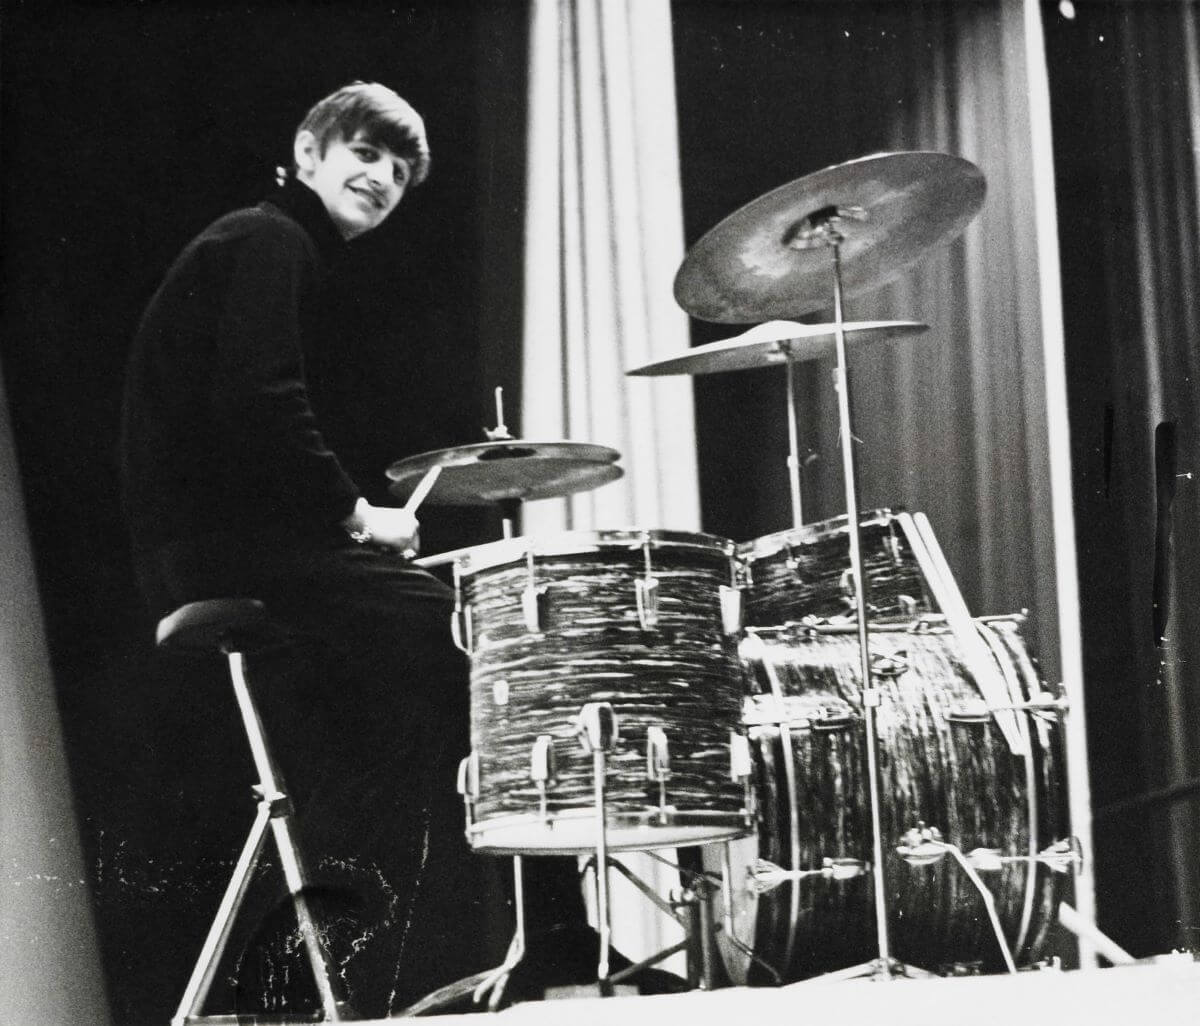 Ringo Starr sits at a drum set and looks at the camera.